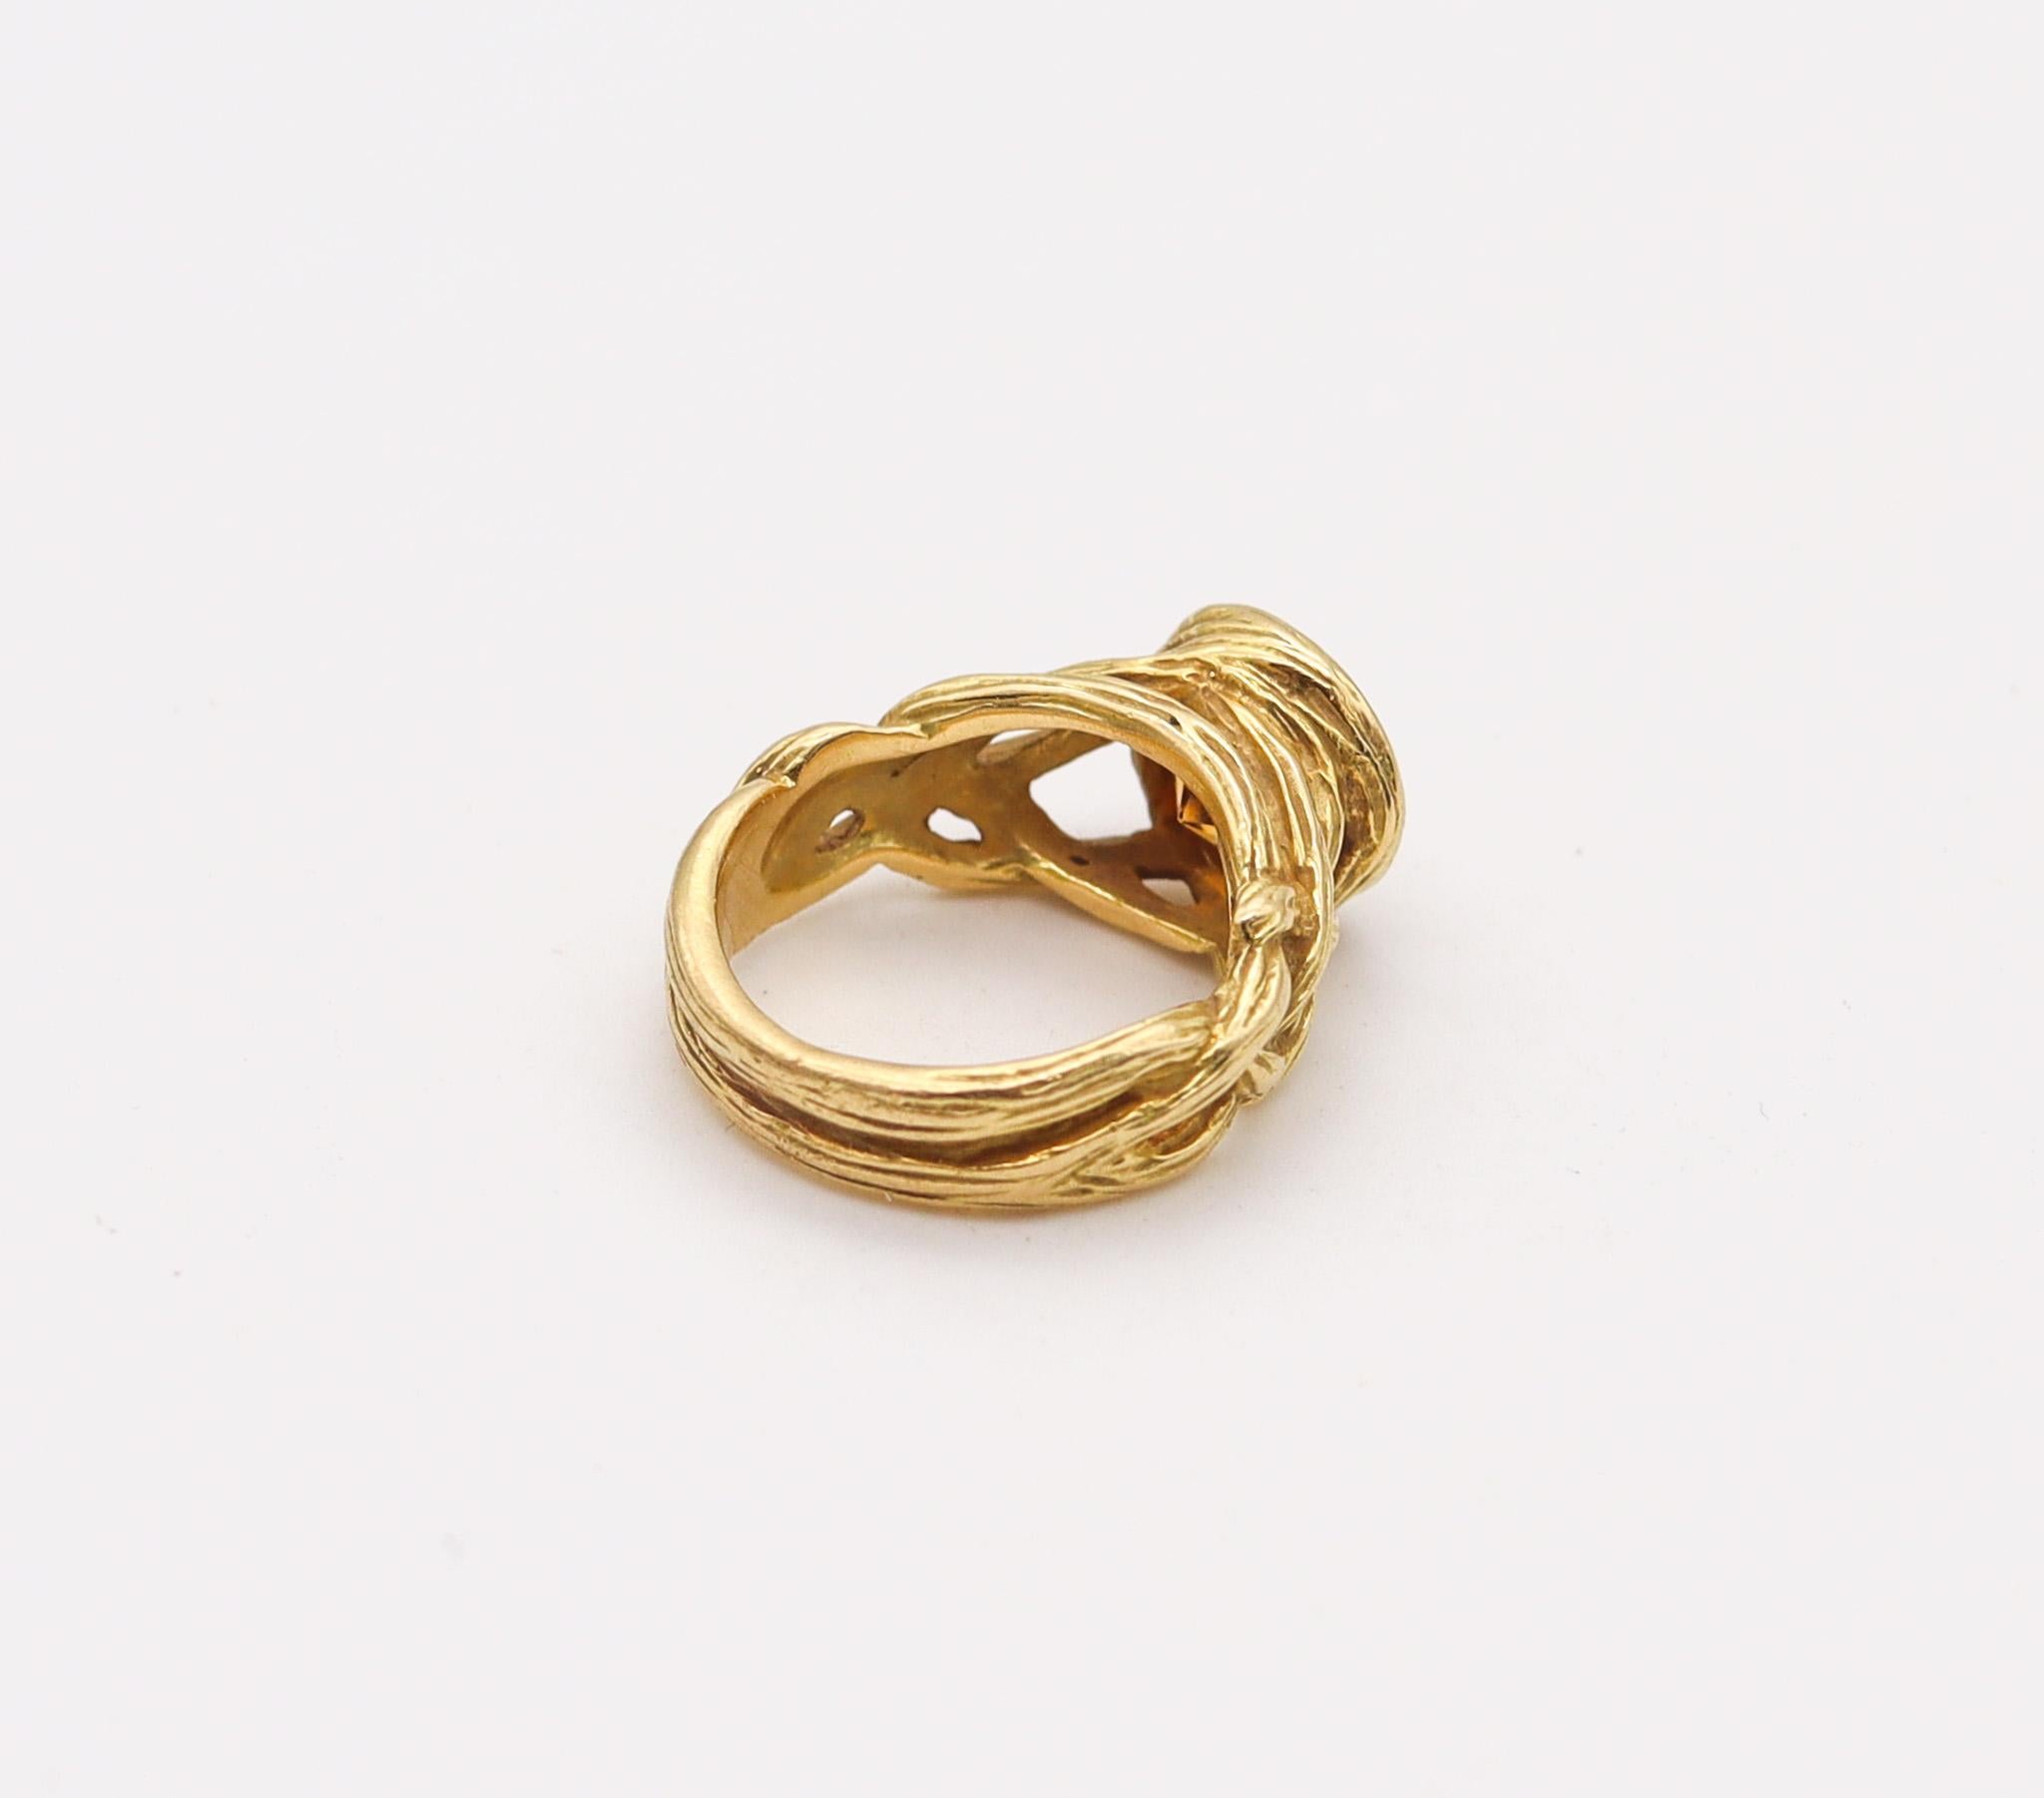 Modernist Angela Cummings 1991 Organic Roots Ring In 18Kt Gold With Round Orange Citrine For Sale